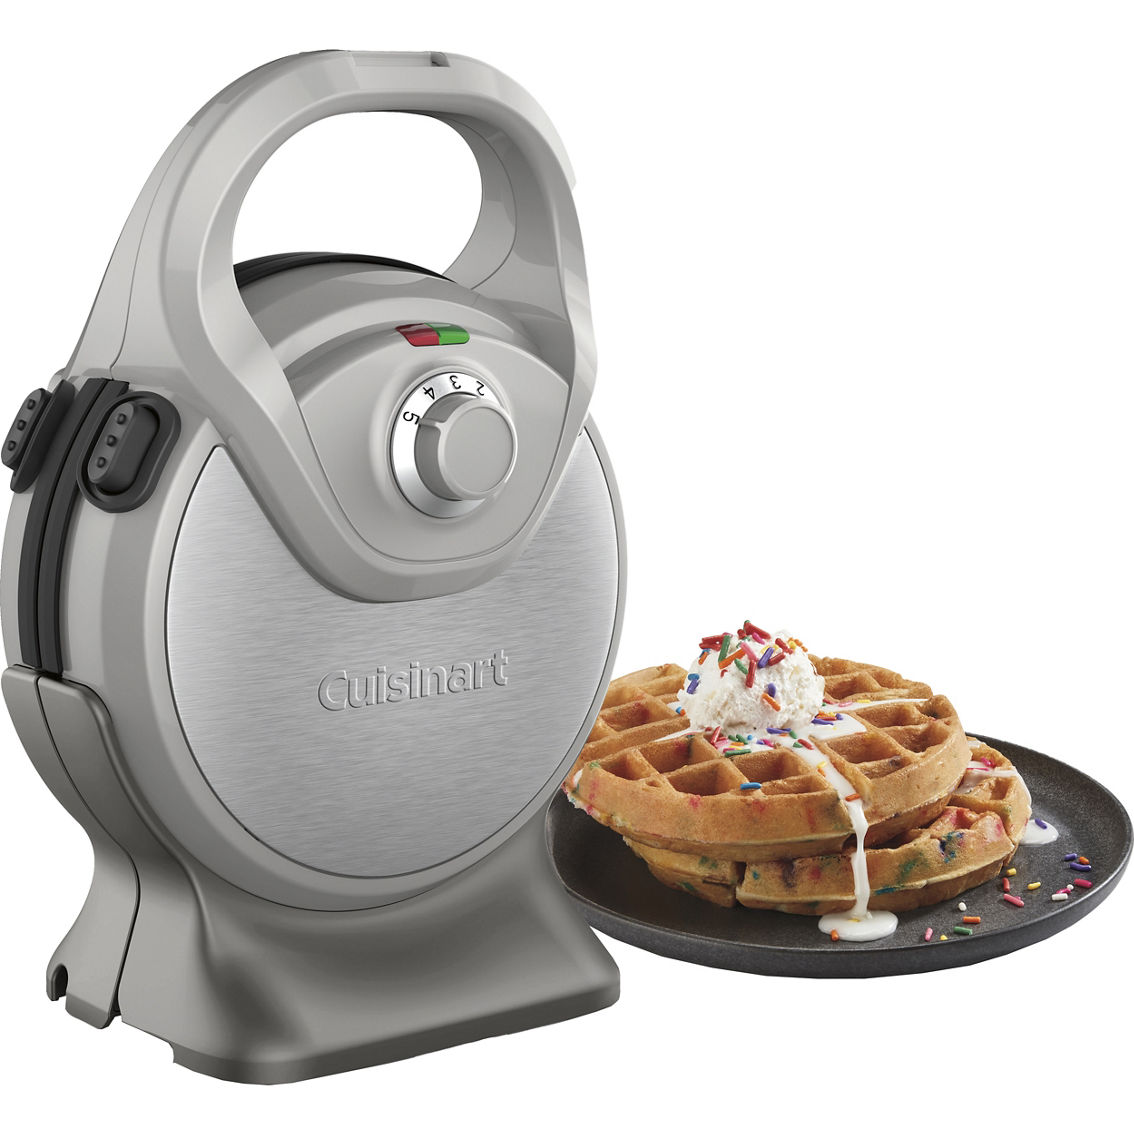 Cuisinart 2-in-1 Waffle Maker with Removable Plates - Image 2 of 3